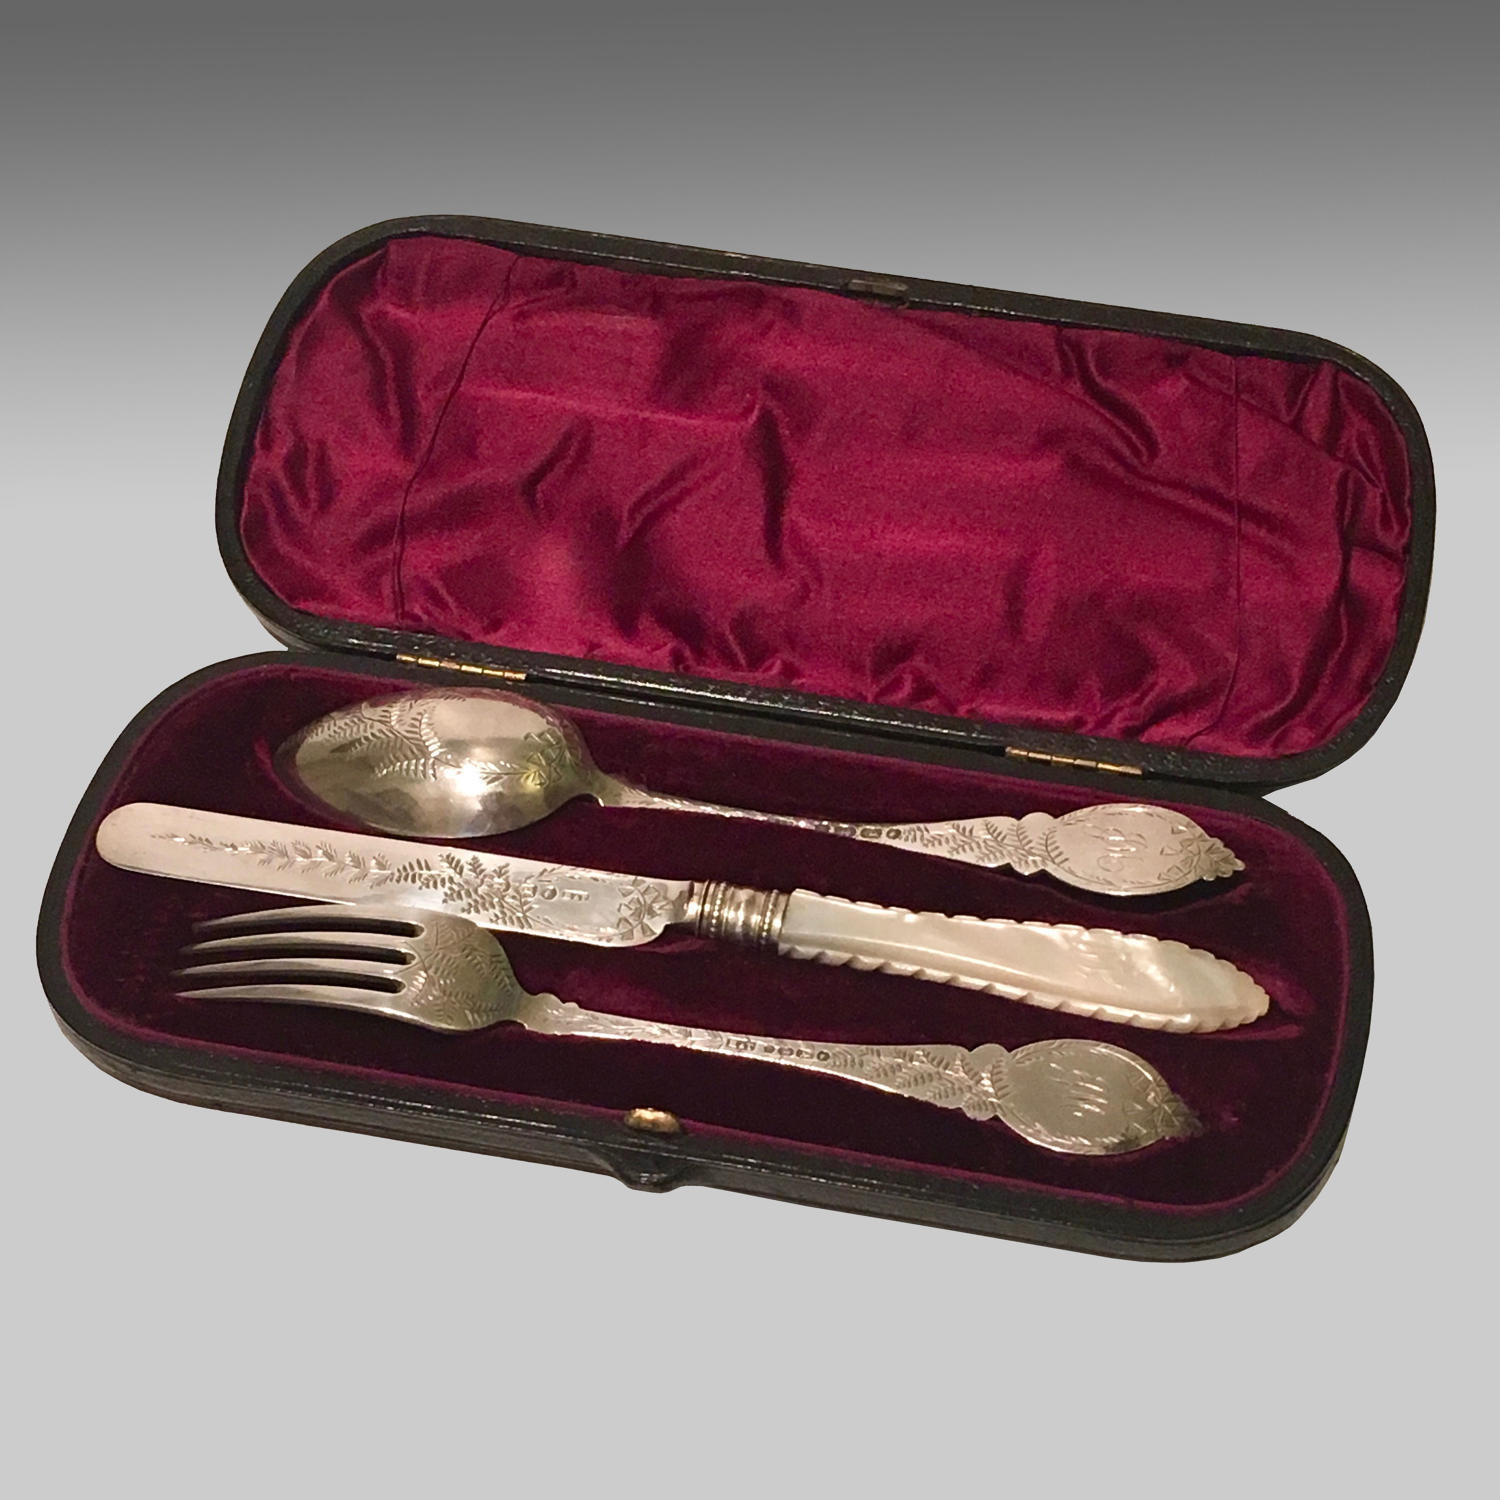 19th century boxed silver christening set